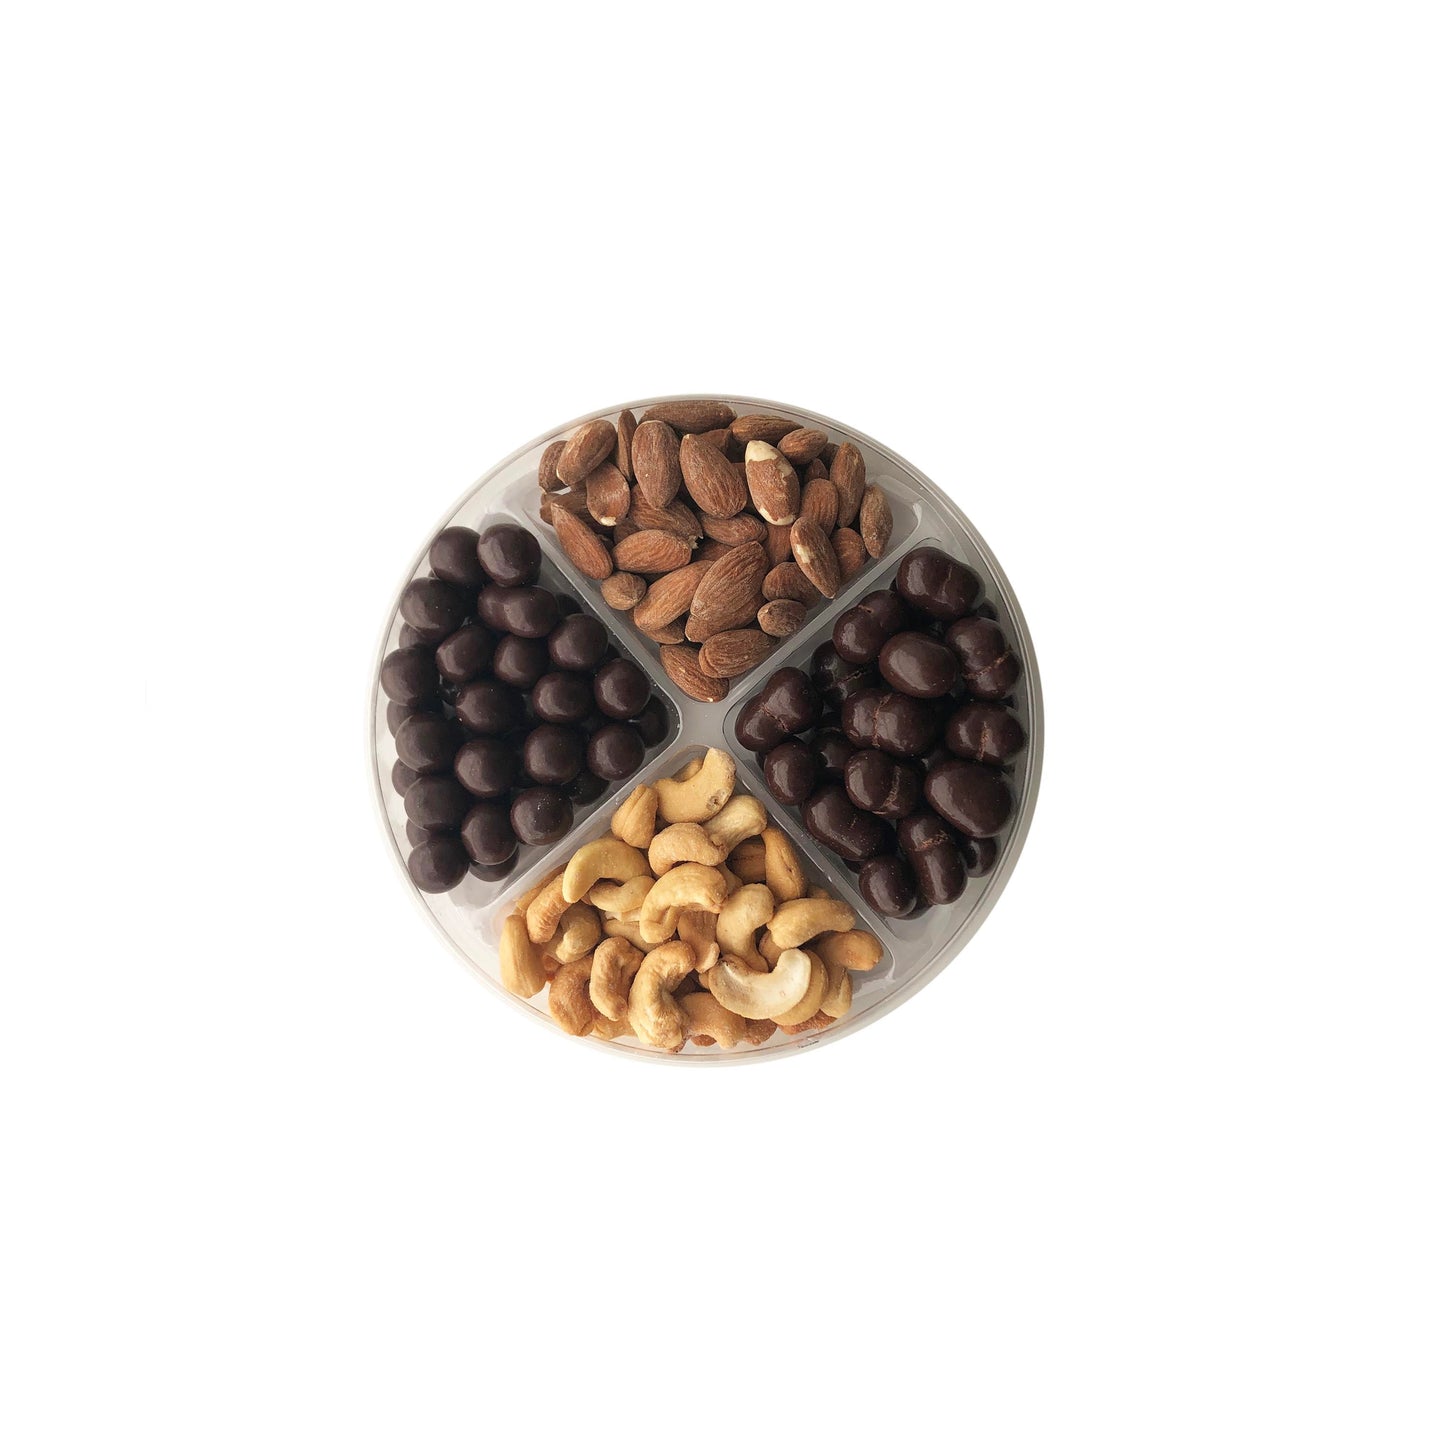 Chocolate and Nuts Platter, 4 Section